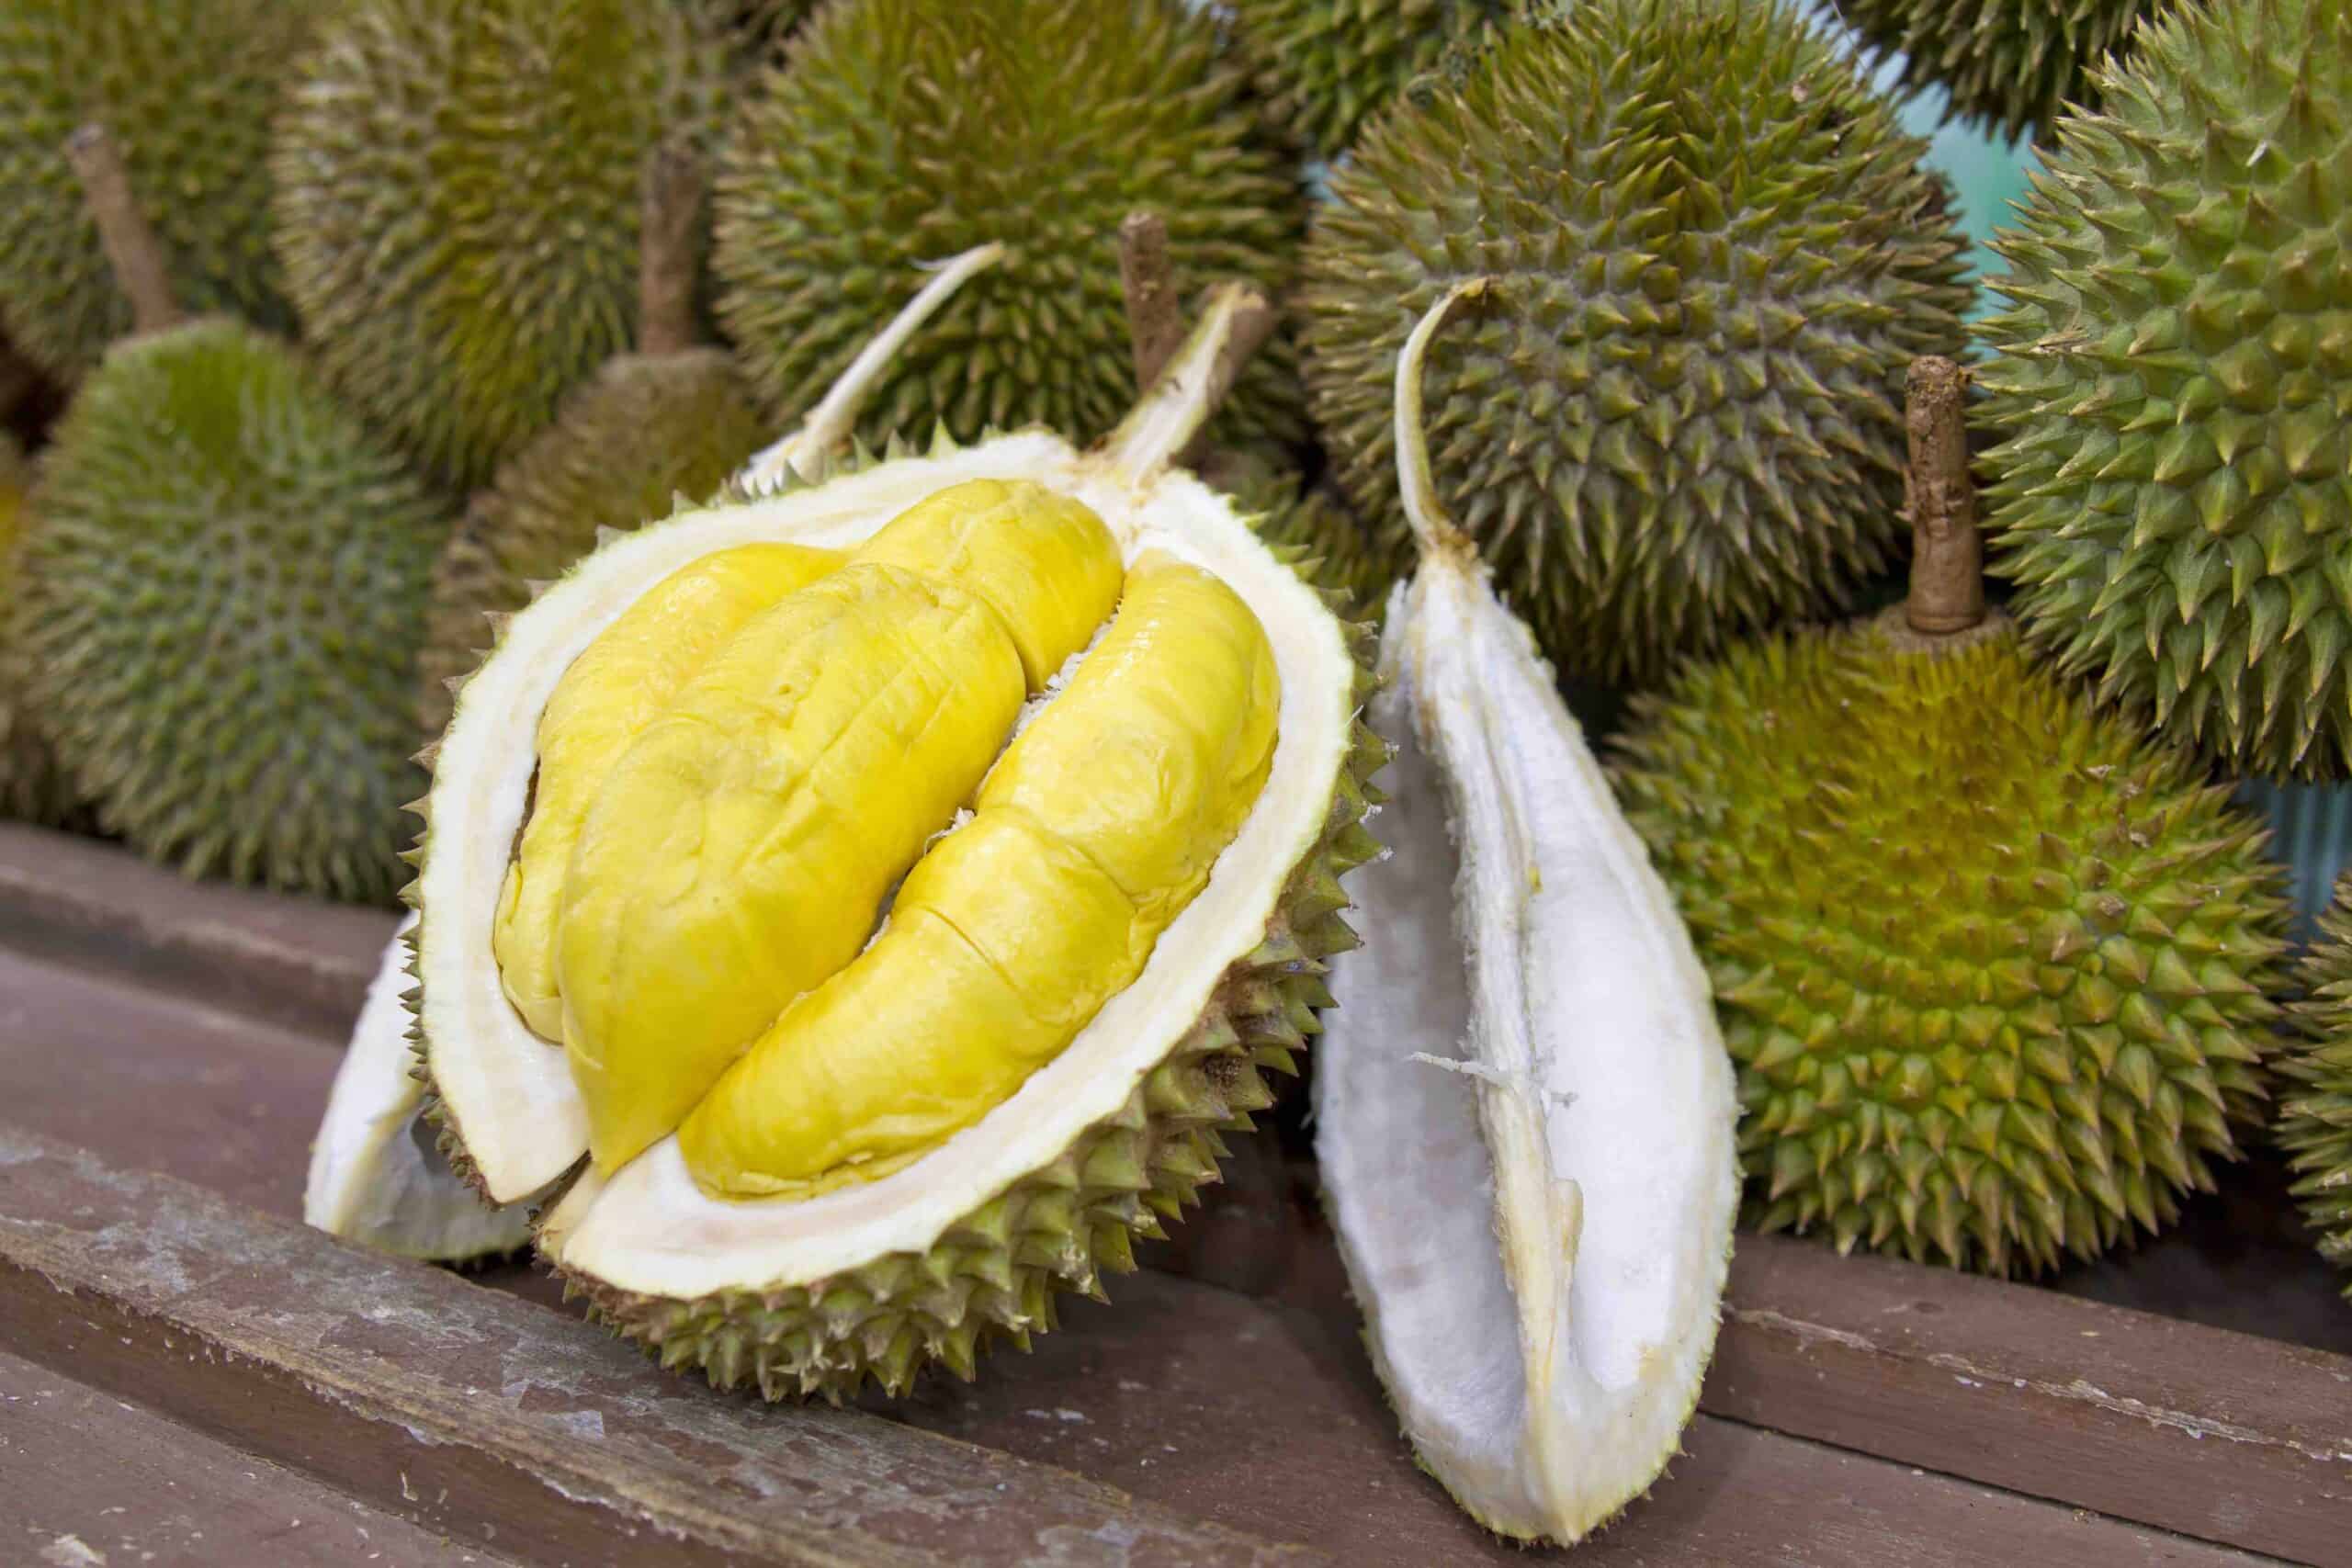 Durian open in display with yellow flesh on fruit stand in tropical country 2